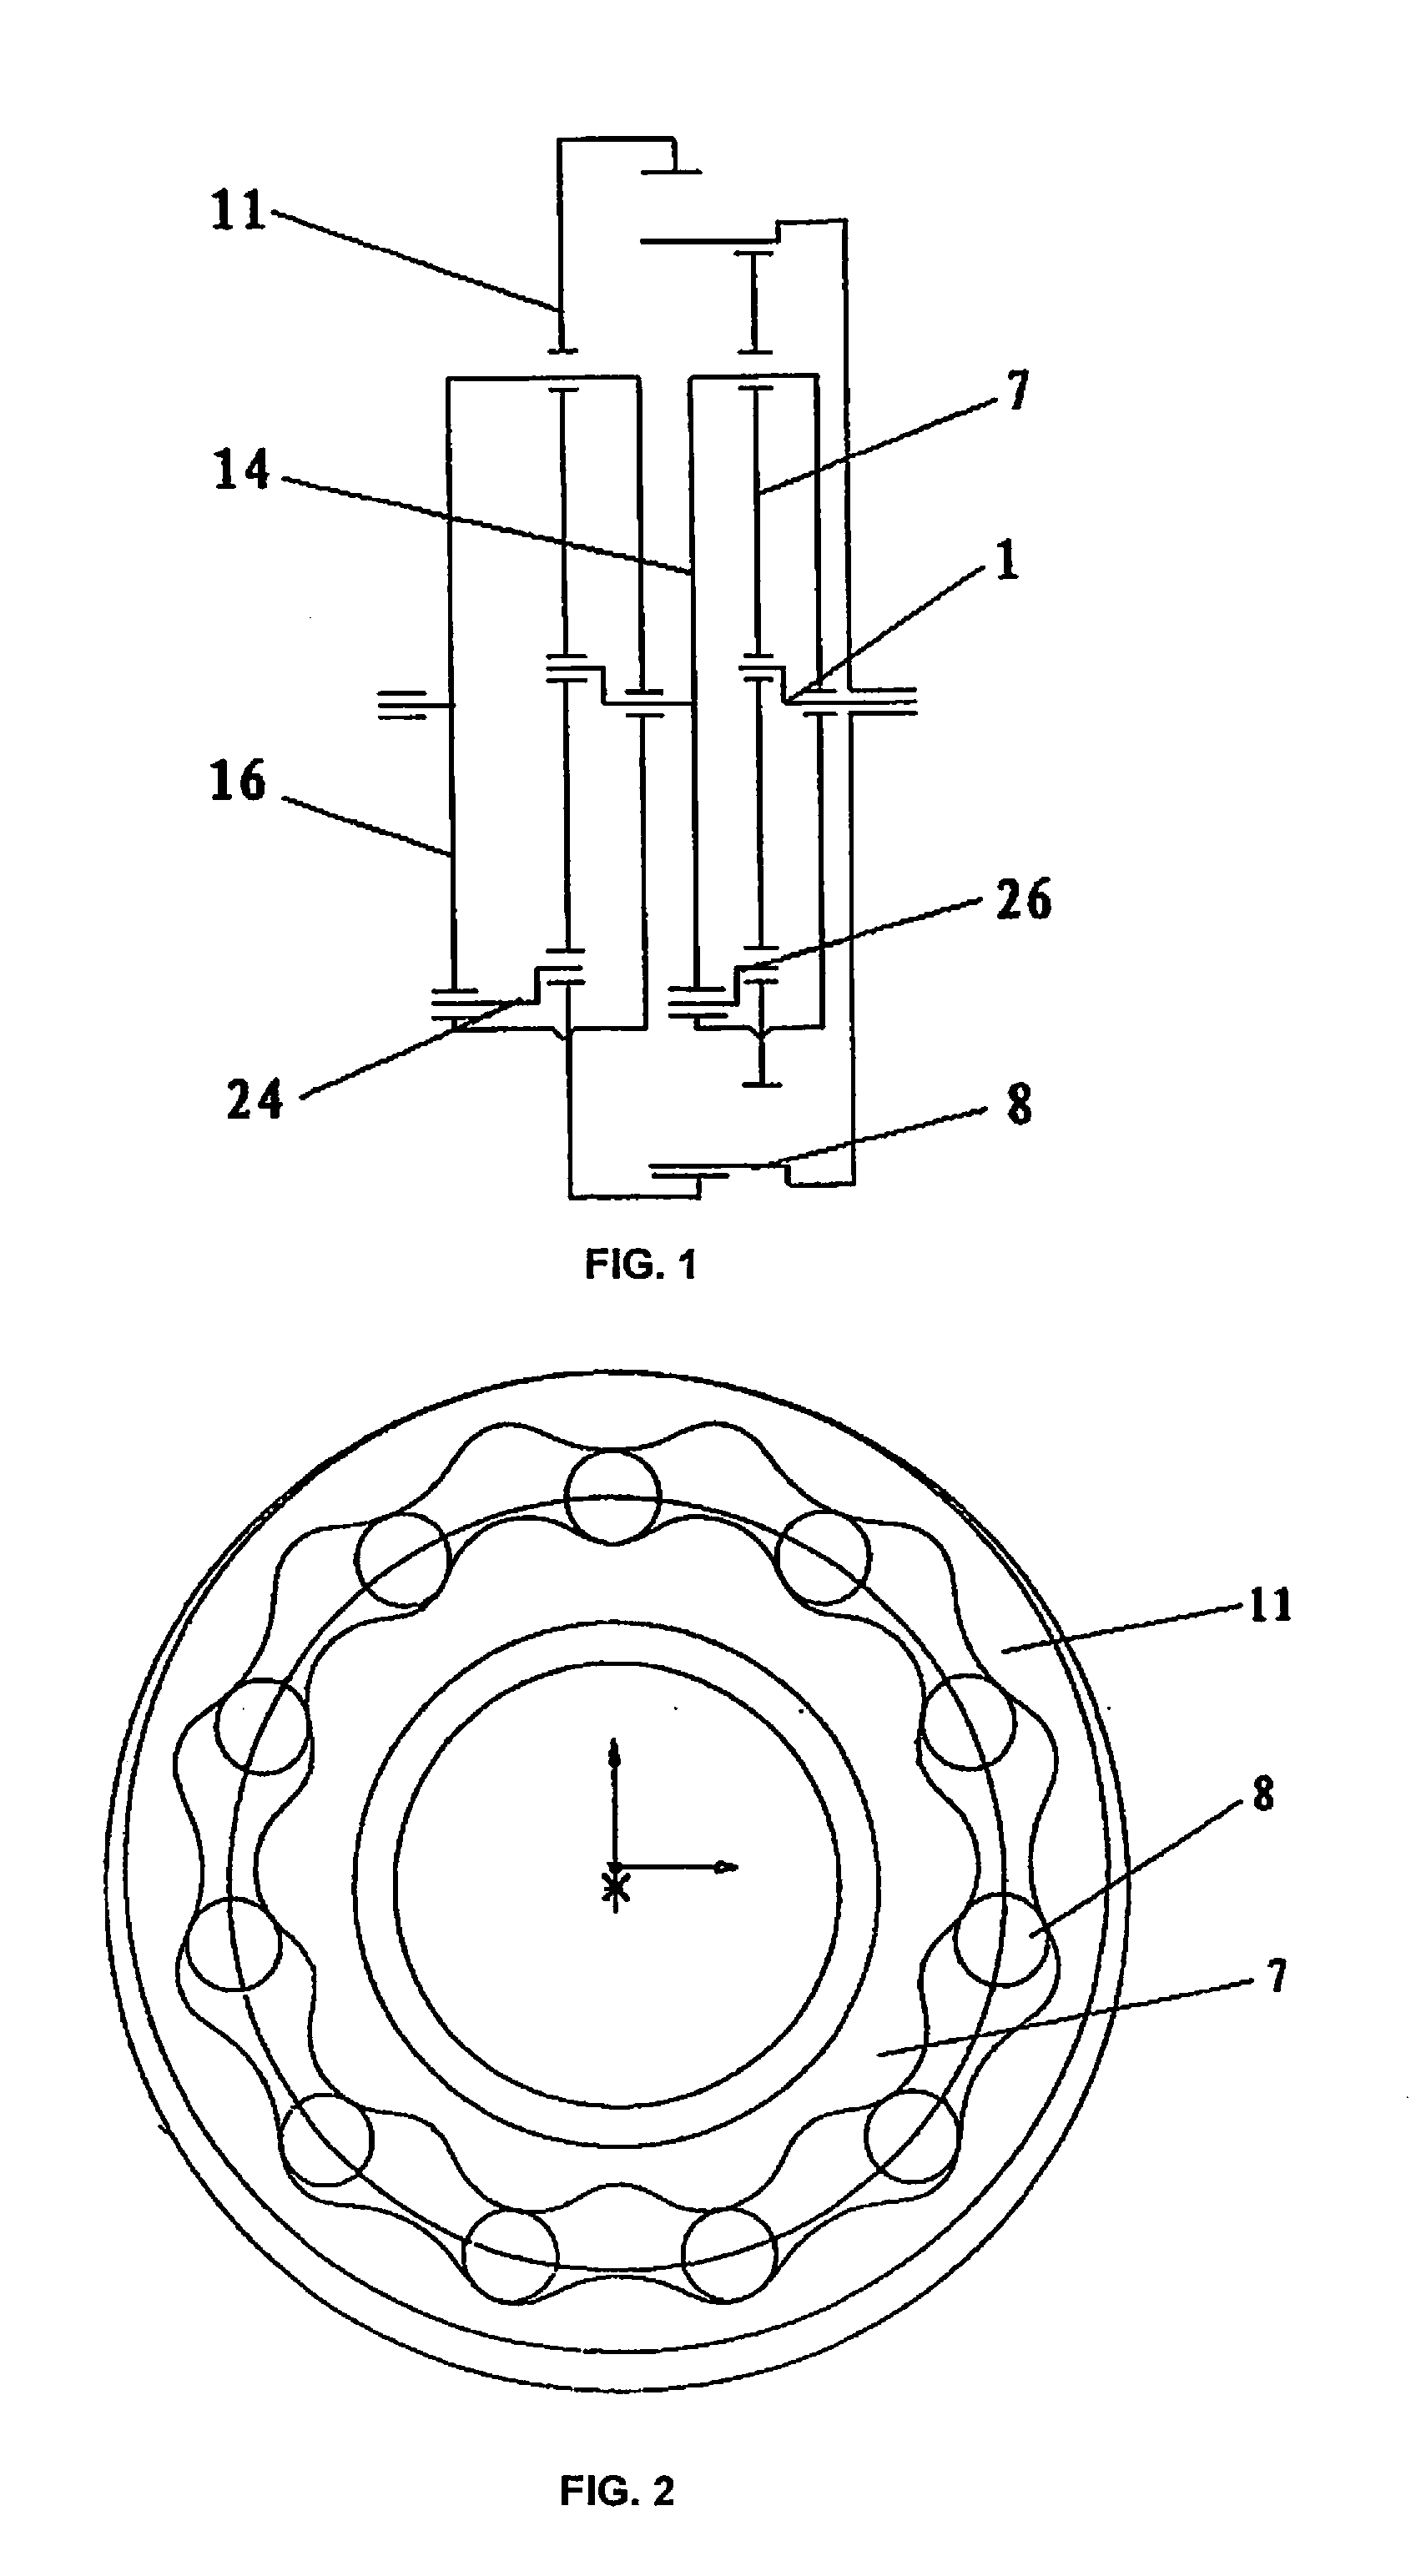 Rigid speed reducer with internal and external tooth profile tooth-enveloping